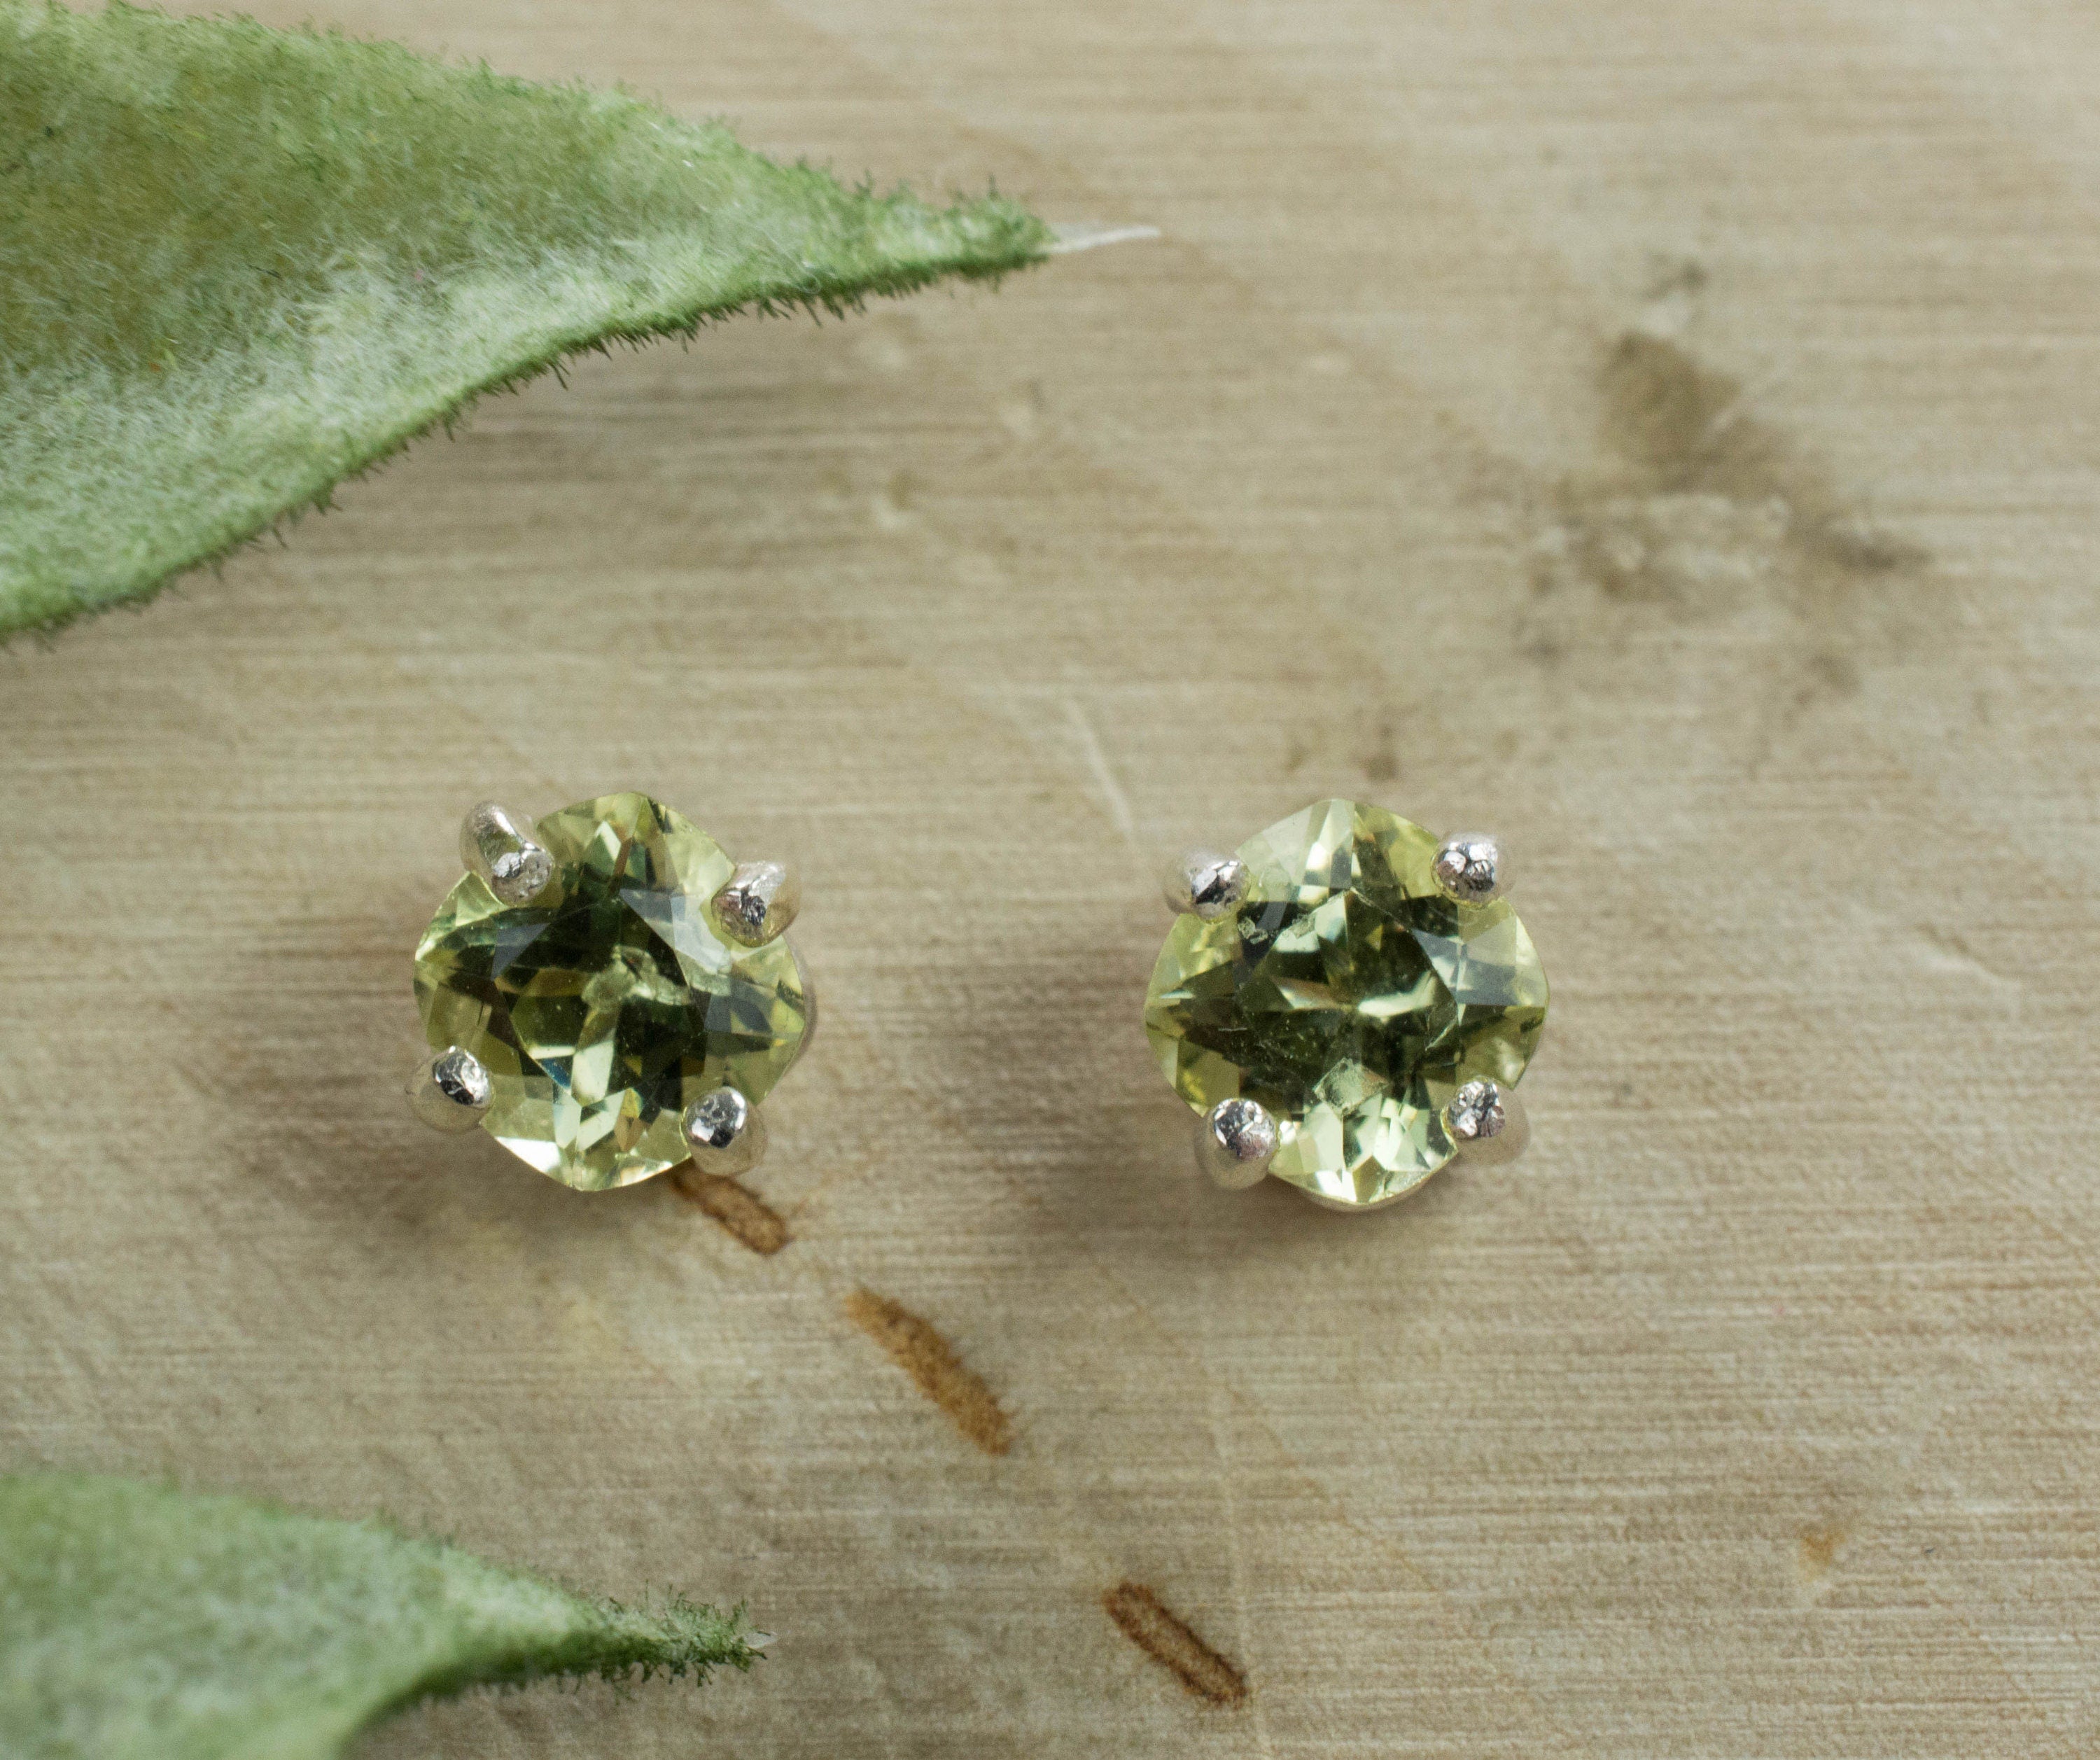 Yellow Apatite Earrings; Genuine Untreated Mexican Apatite - Mark Oliver Gems